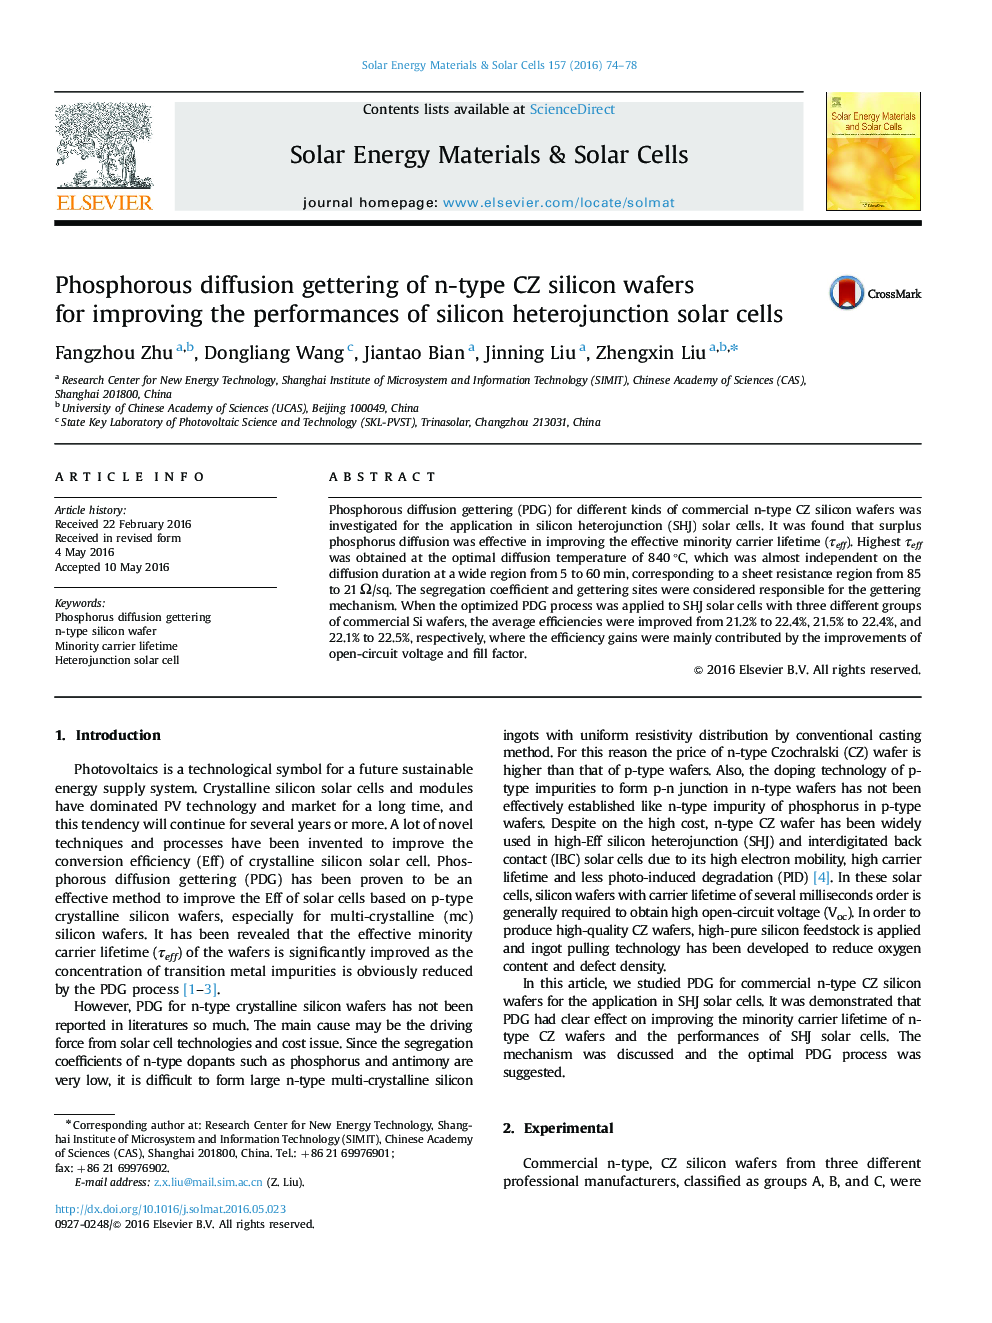 Phosphorous diffusion gettering of n-type CZ silicon wafers for improving the performances of silicon heterojunction solar cells